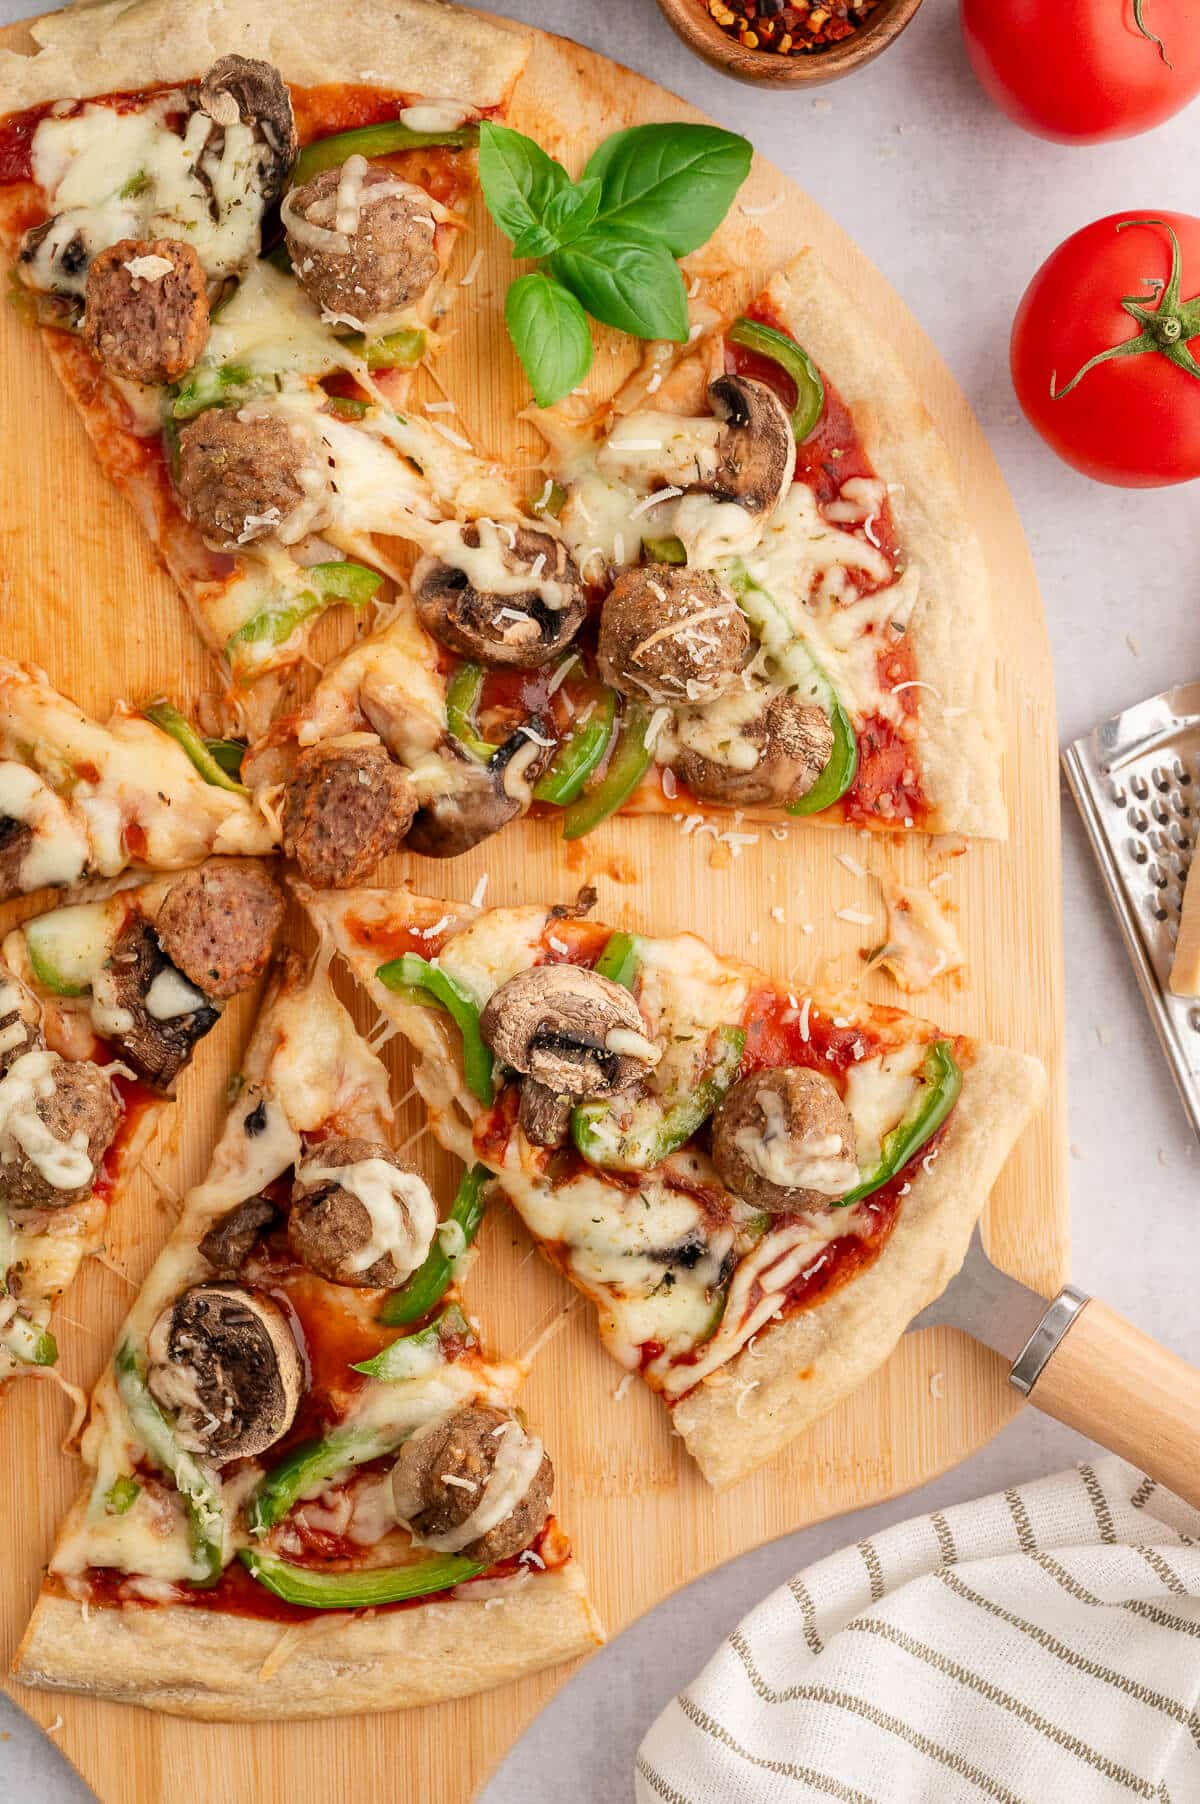 Slices of Italian meatball pizza on a wooden cutting board.